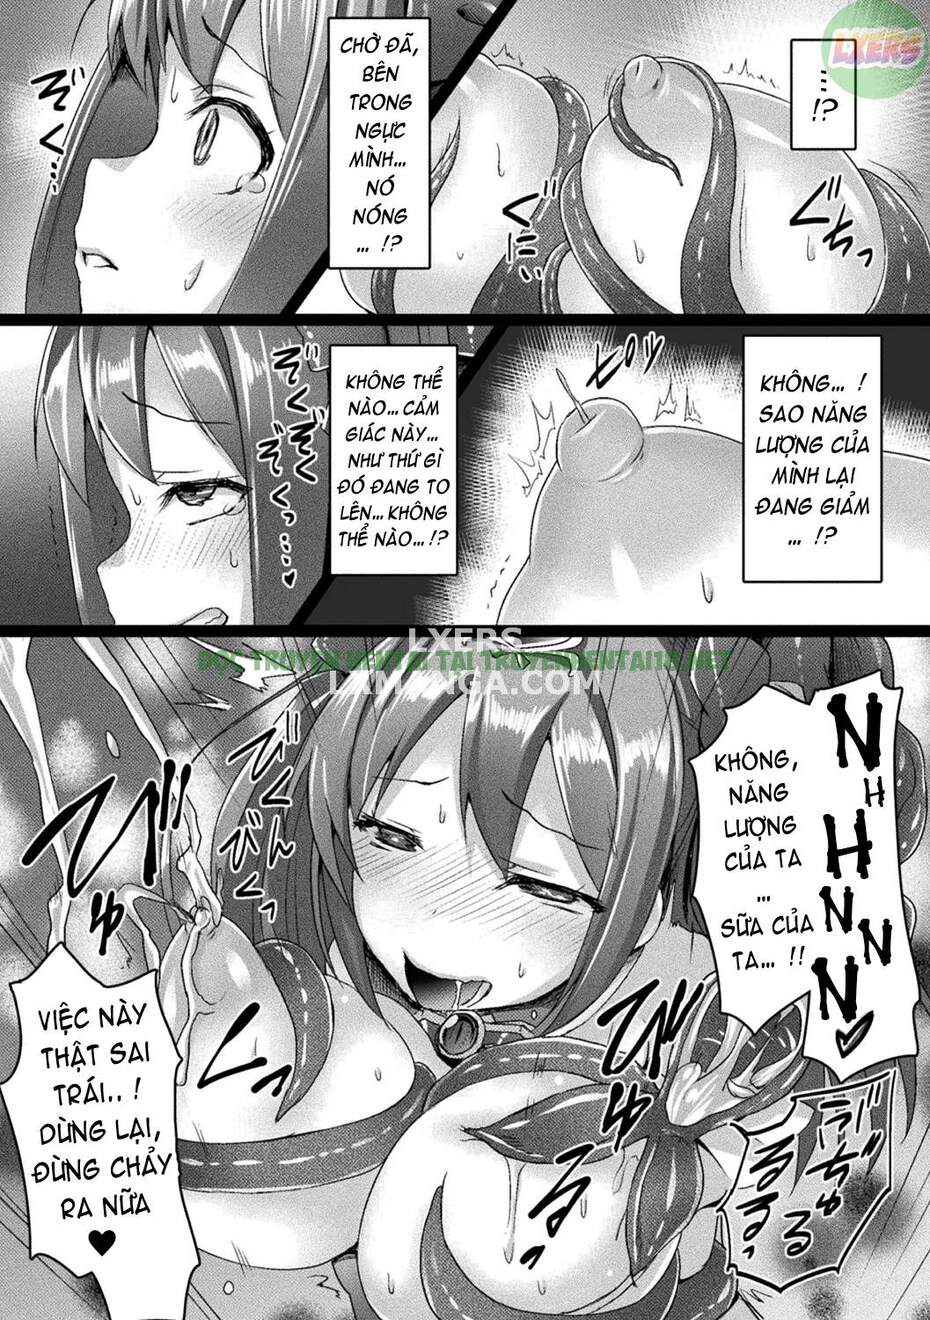 Xem ảnh The Archangel Of Love, Love Mary - Chapter 6 END - 20 - Hentai24h.Tv